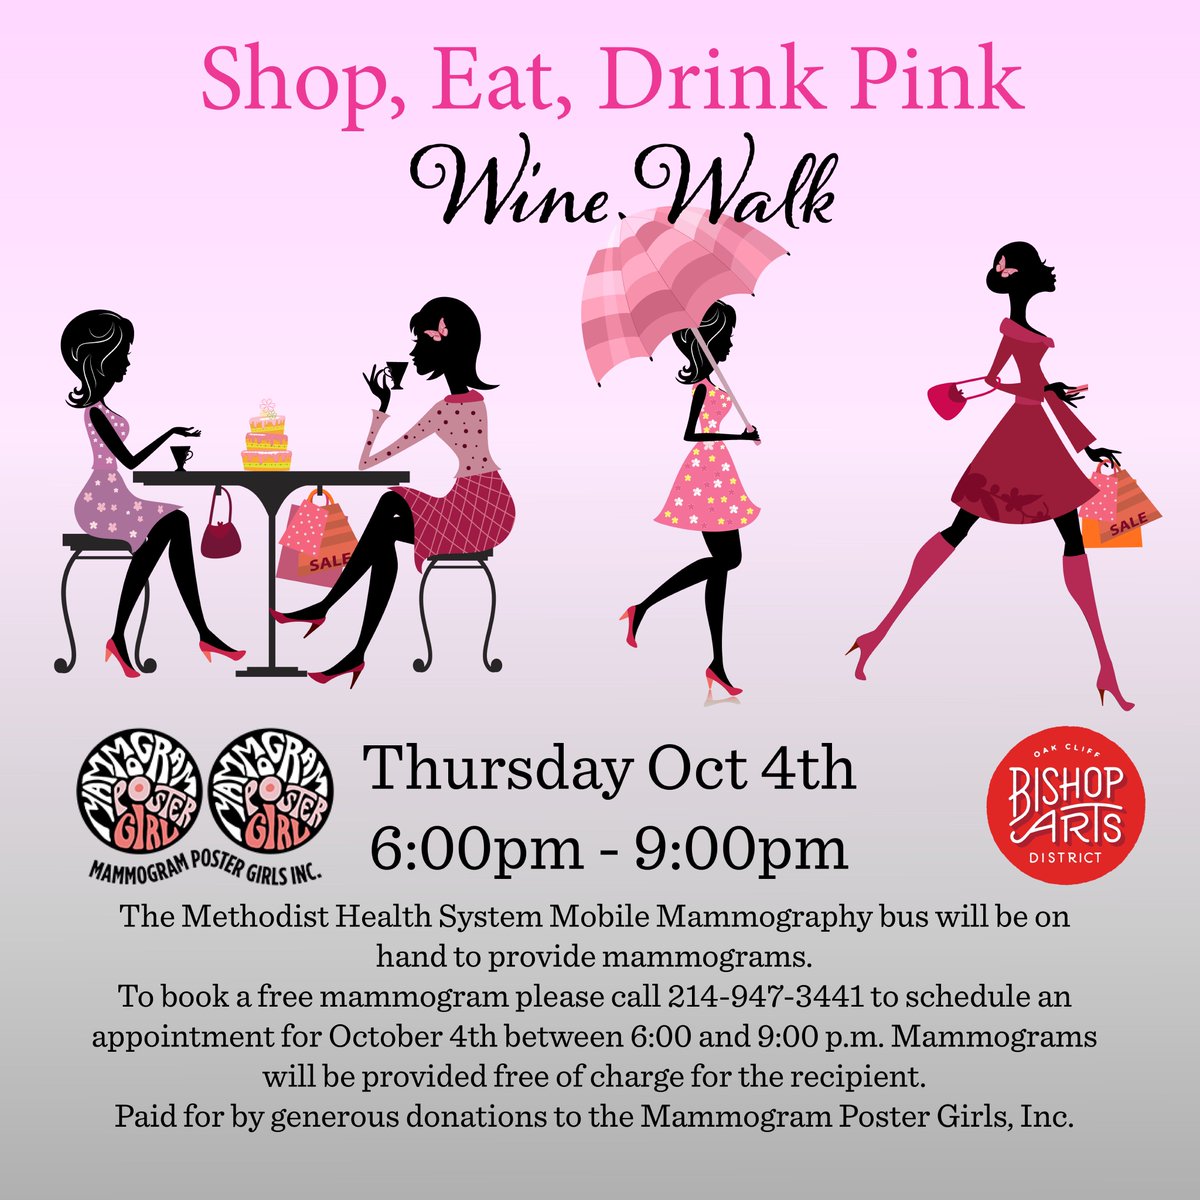 #Sip & #shop in the #BishopArts to help raise awareness for the early detection of #breastcancer! #Tickets on sale NOW for Shop, Eat and Drink PINK! #WineWalk this Thursday: bit.ly/2NZEAEg / More info: bit.ly/2N6SBLX